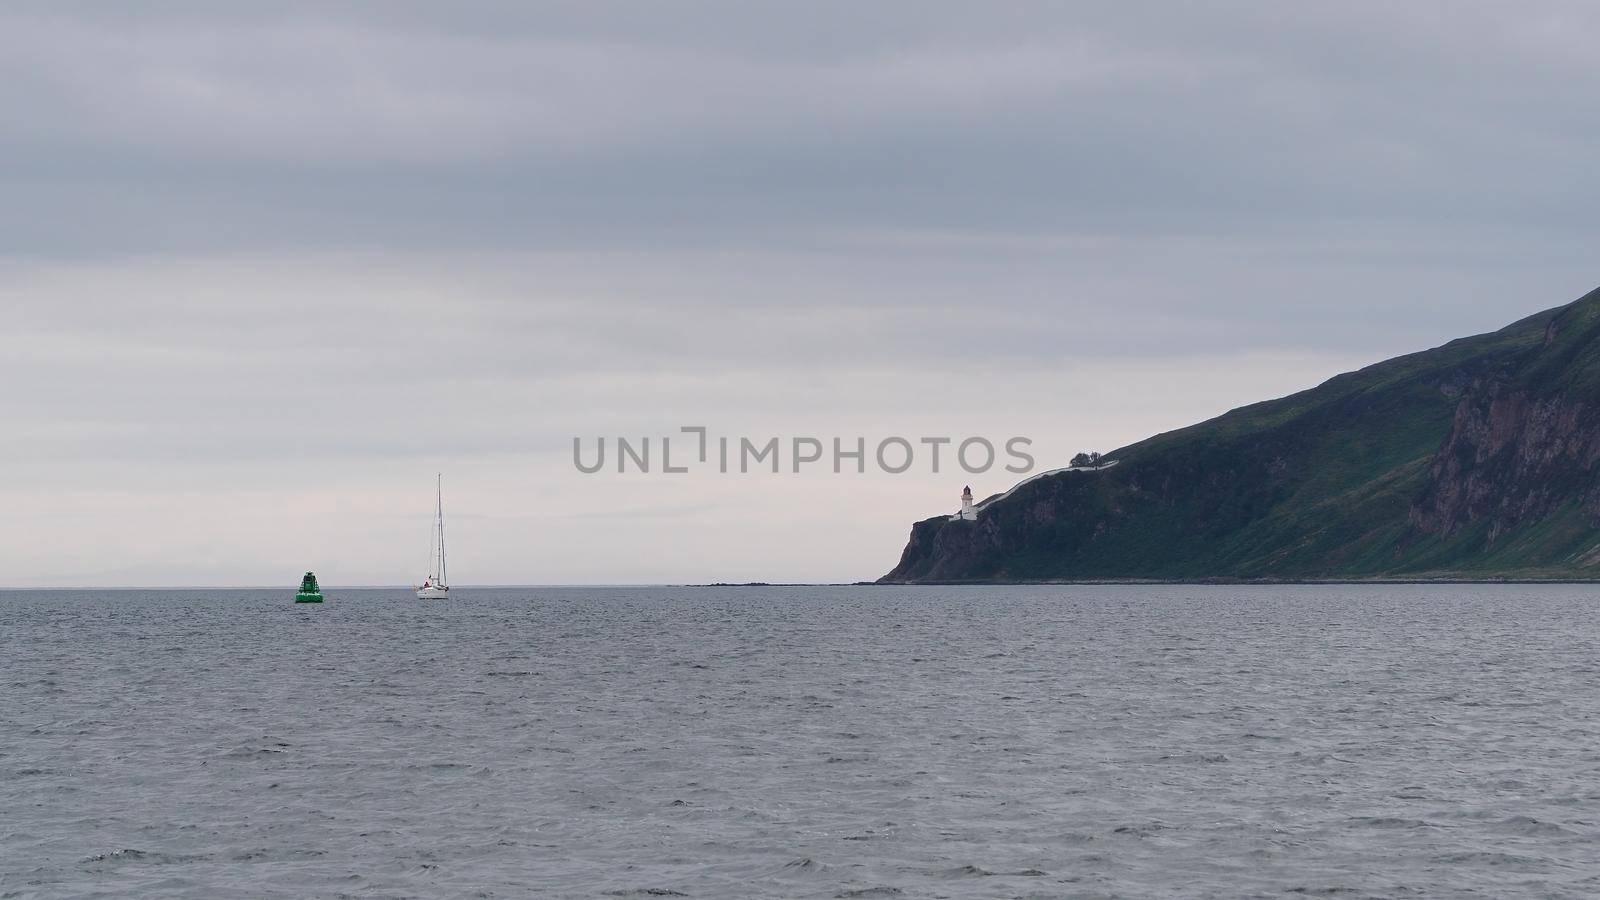 A lone yacht passes McArthurs Head lighthouse situated on Islay at the entrance to the Sound of Islay, Hebrides, Scotland, UK